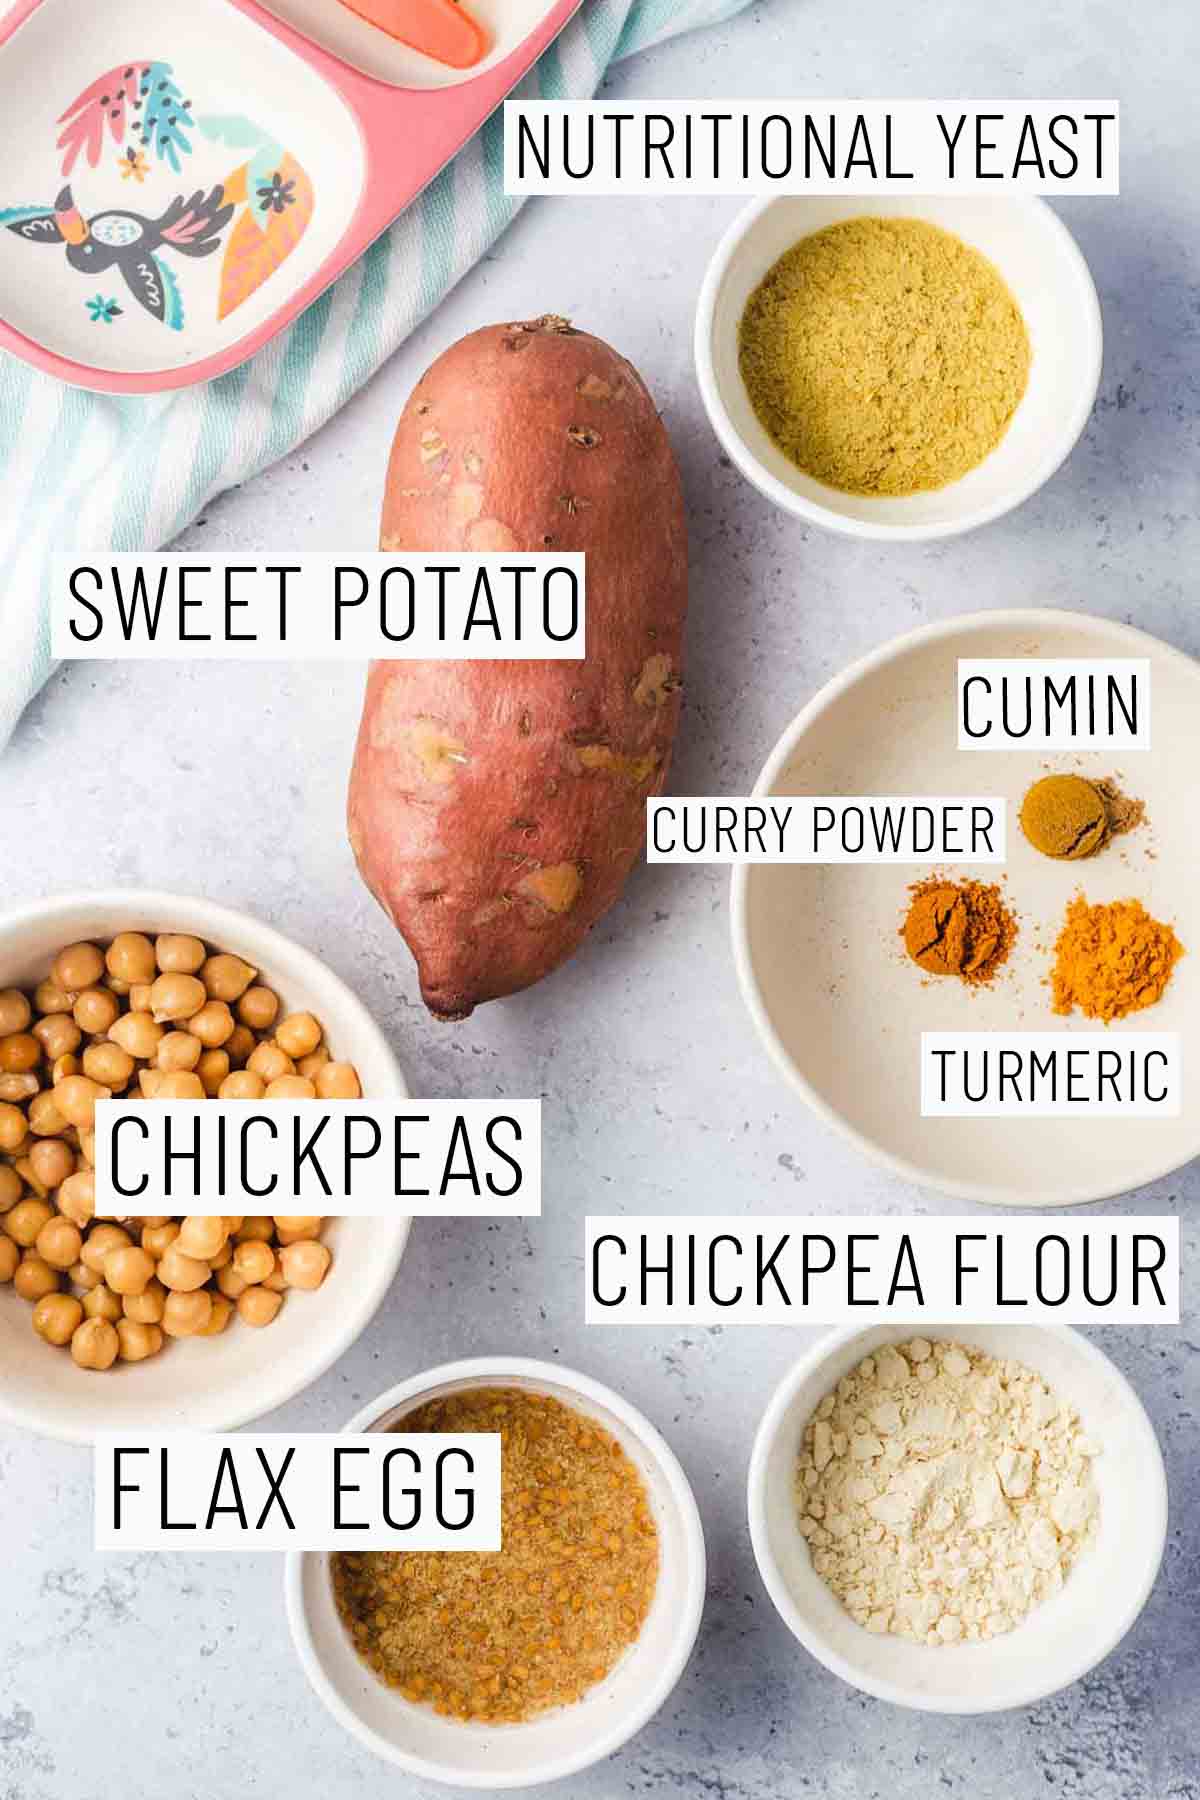 Flay lat image of portioned recipe ingredients including sweet potato, nutritional yeast, chickpeas, turmeric, cumin, curry powder, chickpea flower, and flax egg.